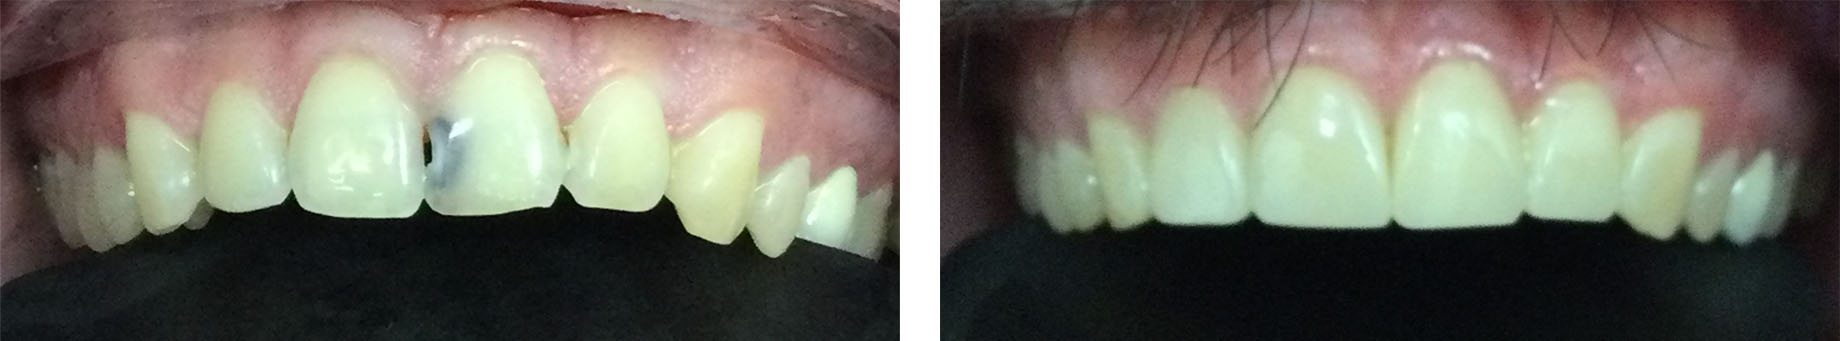 Before and After Photo - Cavity repair